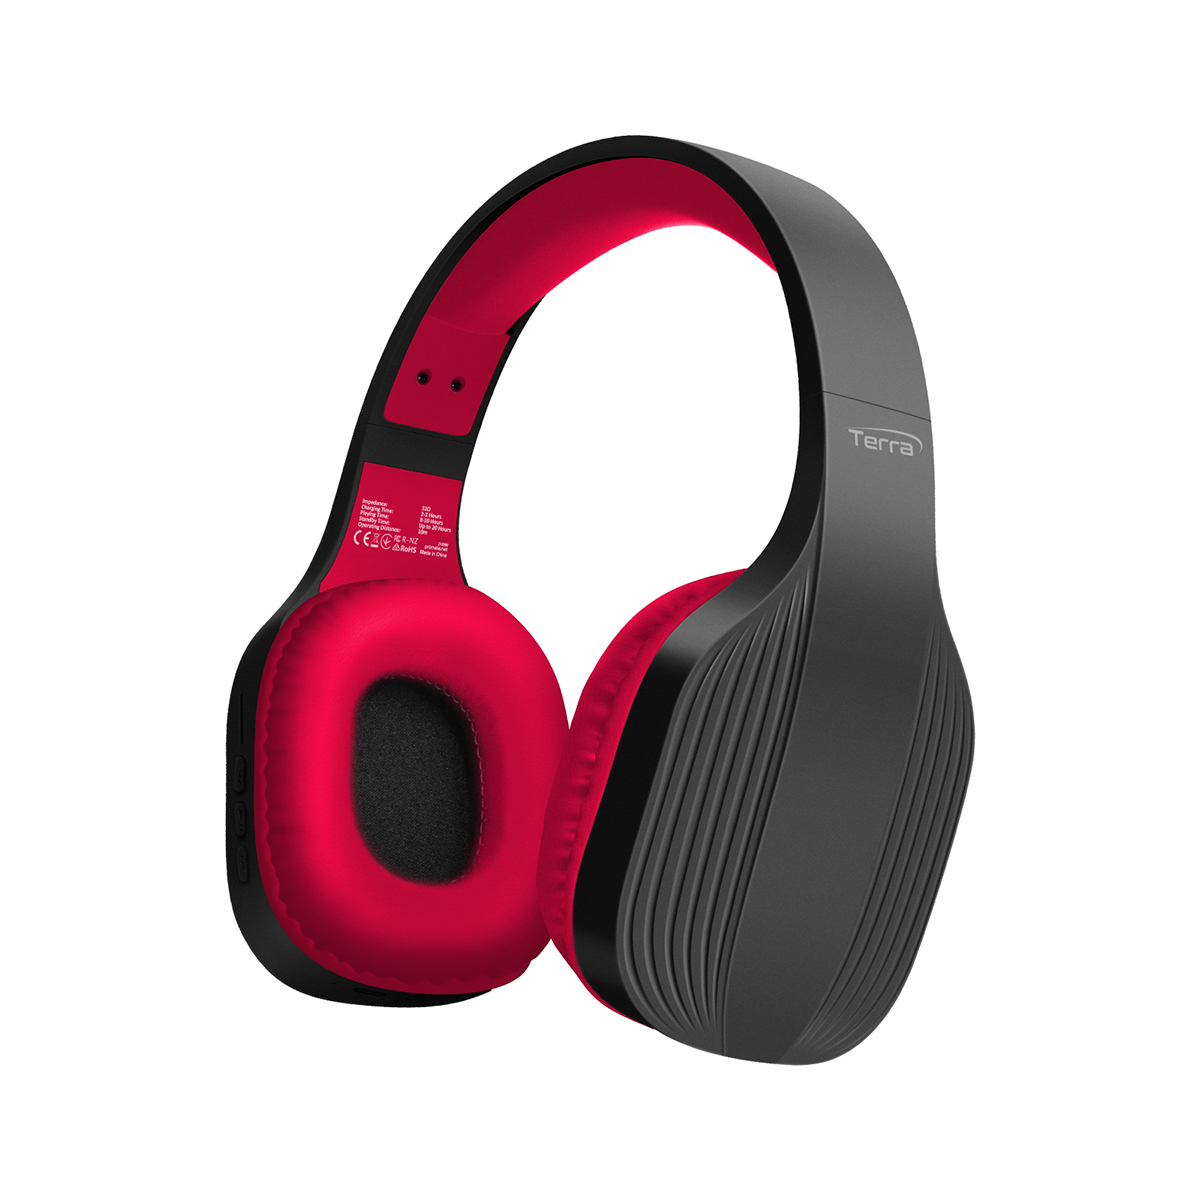 Promate Wireless Headset with Bluetooth v5.1, Audio Jack Wired Mode, Mic, Radio, TF Card Slot and 10H Battery, Terra Maroon